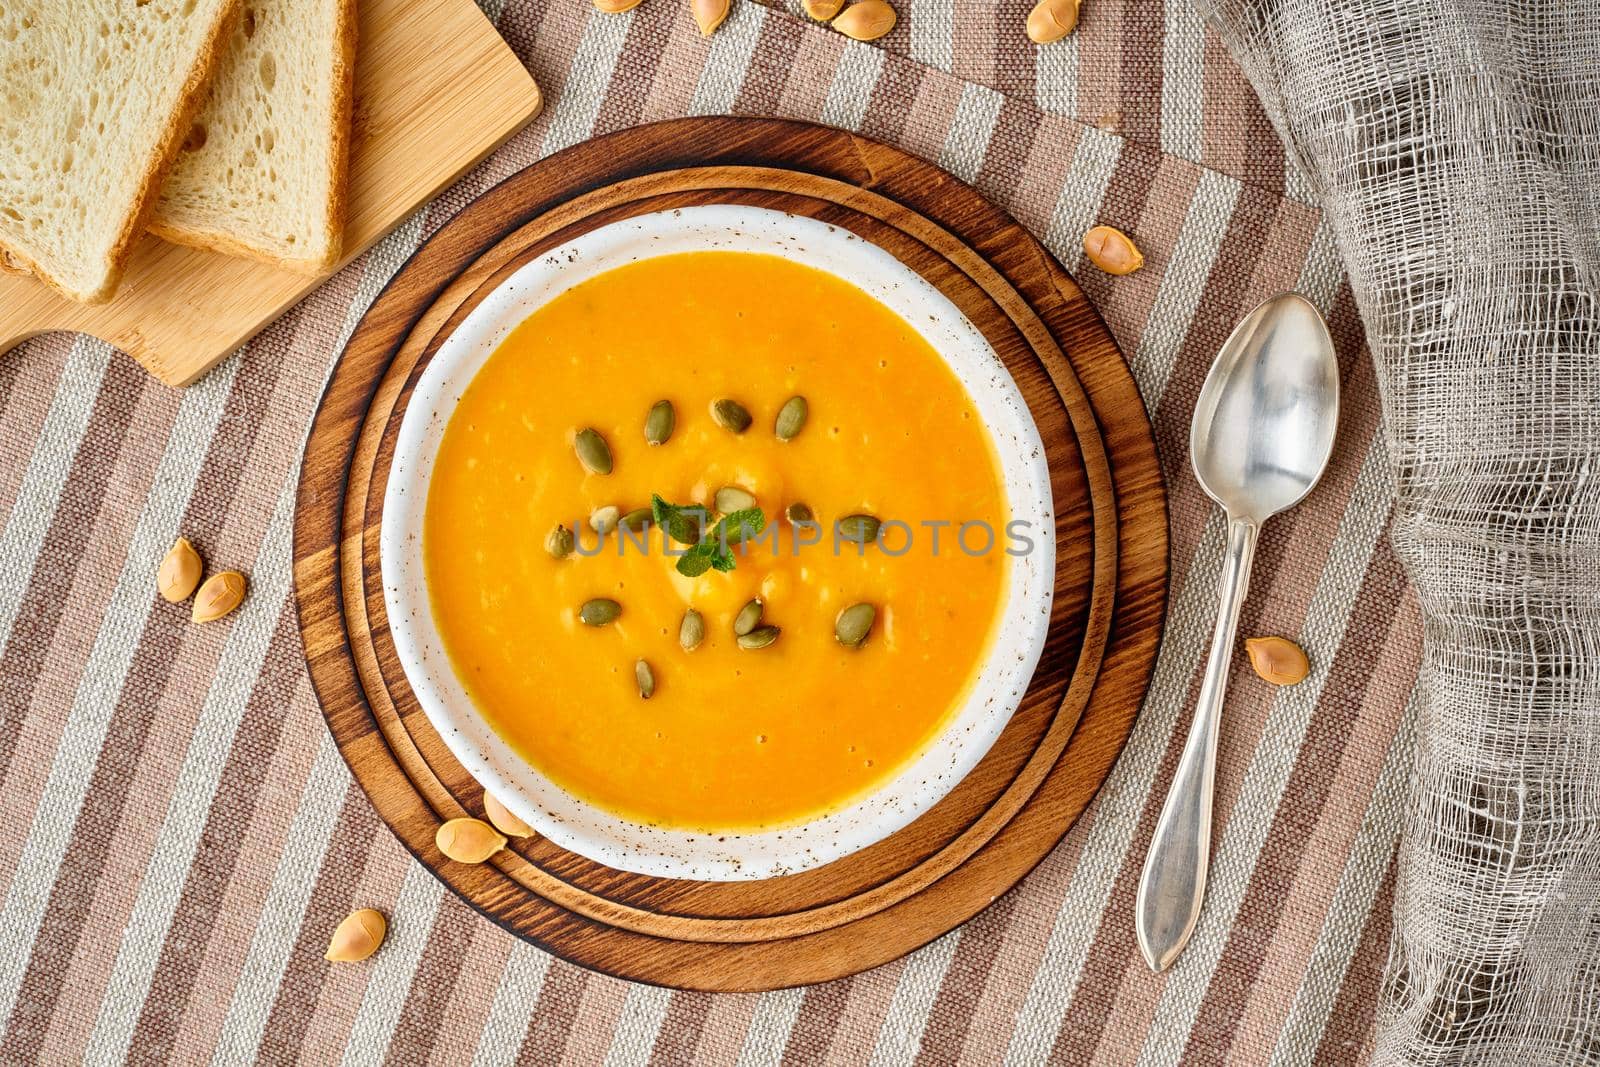 Pupmkin cream soup puree, Dietary vegetarian food on dark brown wooden table, top view, close up.